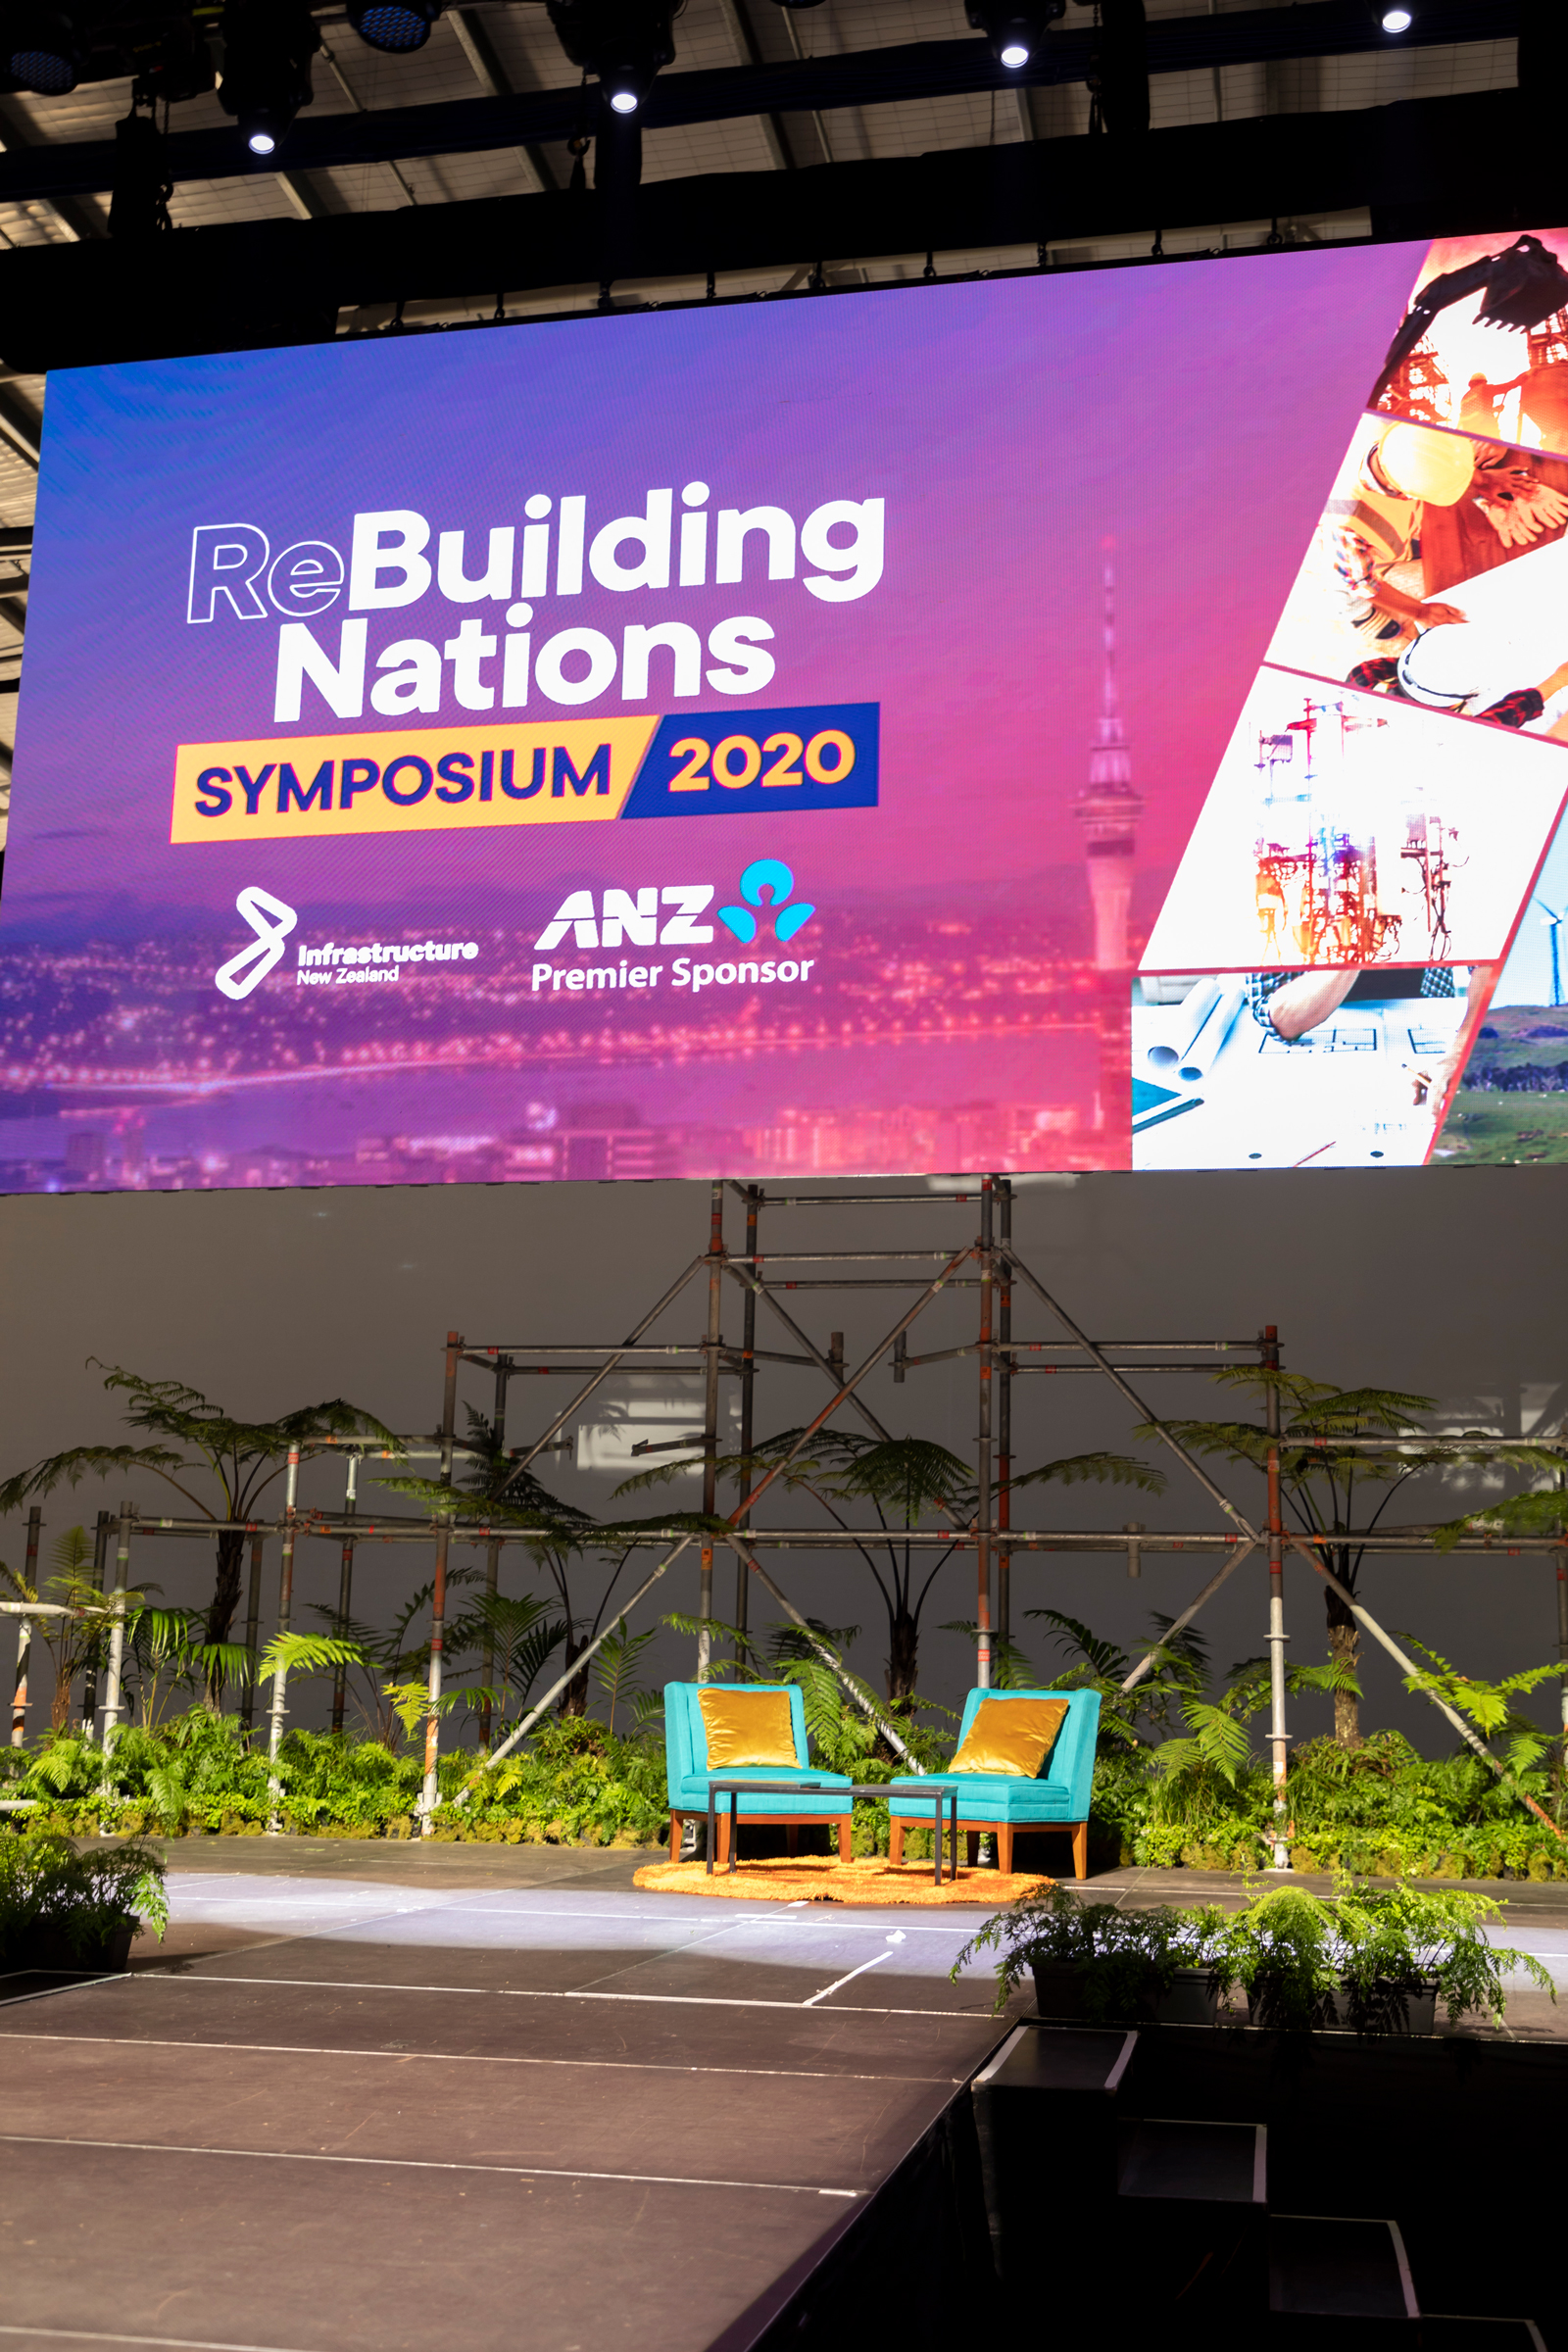 Major Project ... National Building Nations Symposium 2020